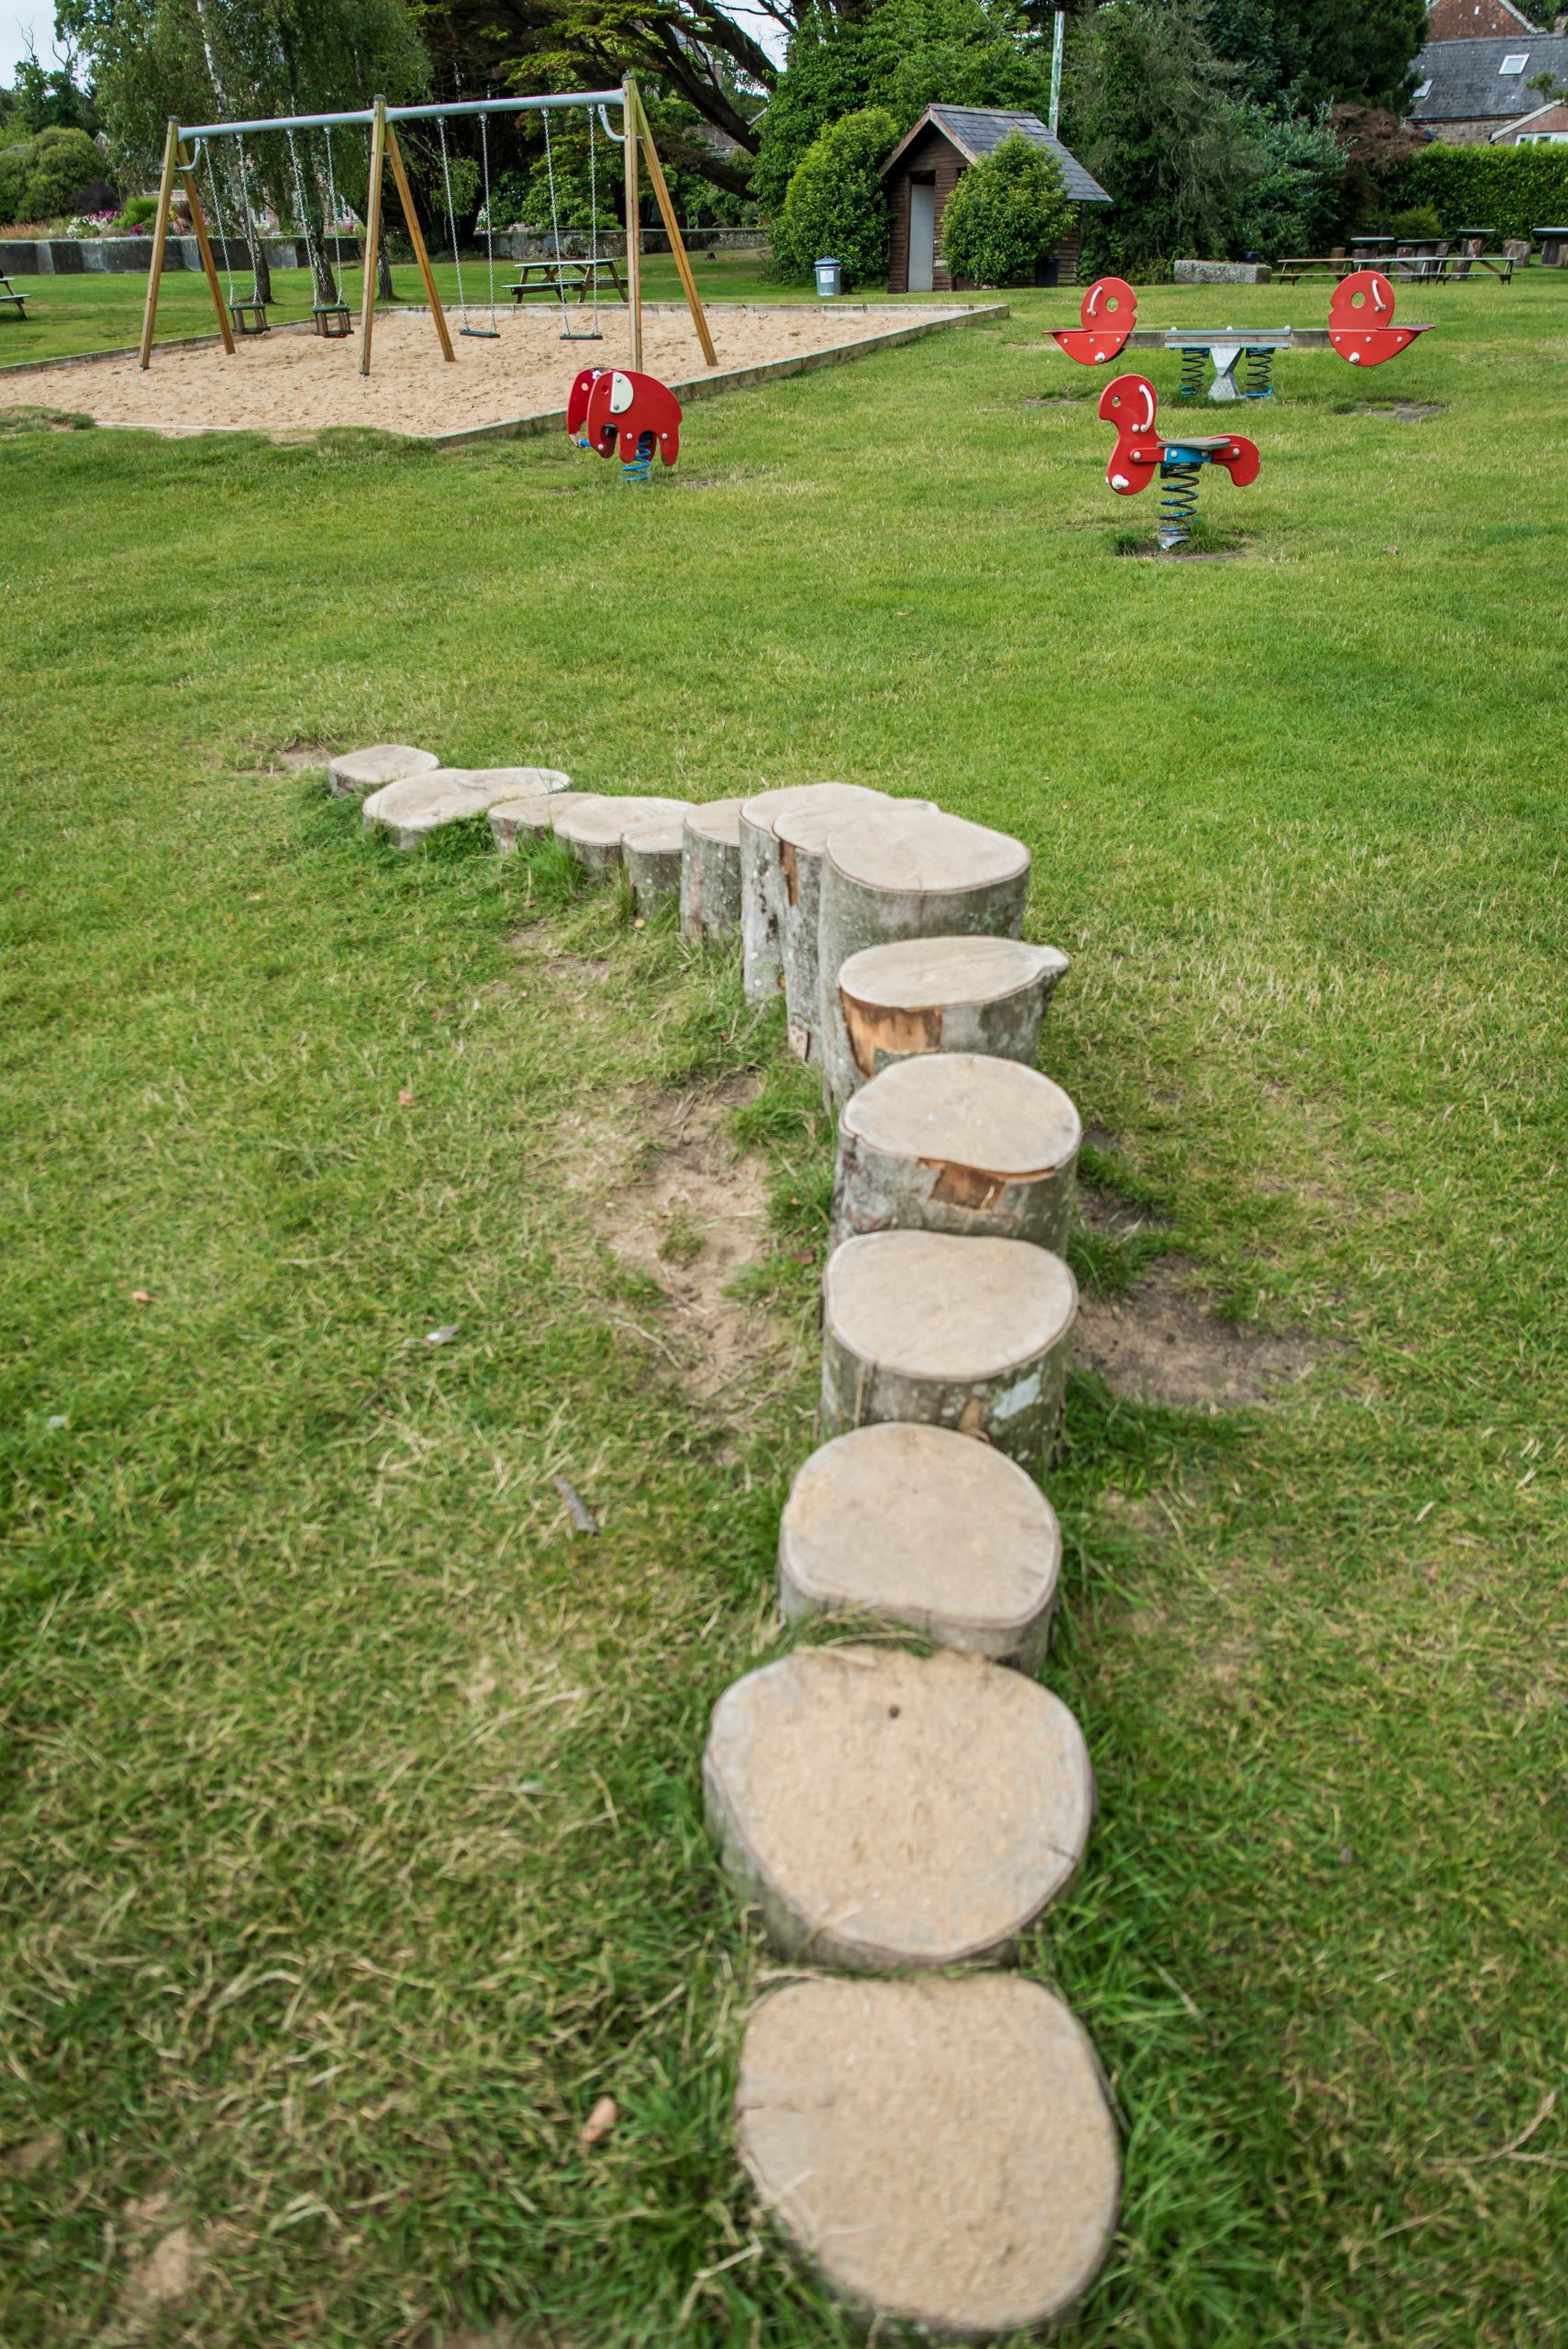 wooden stumps in a row going from shortest to tallest then back to shortest